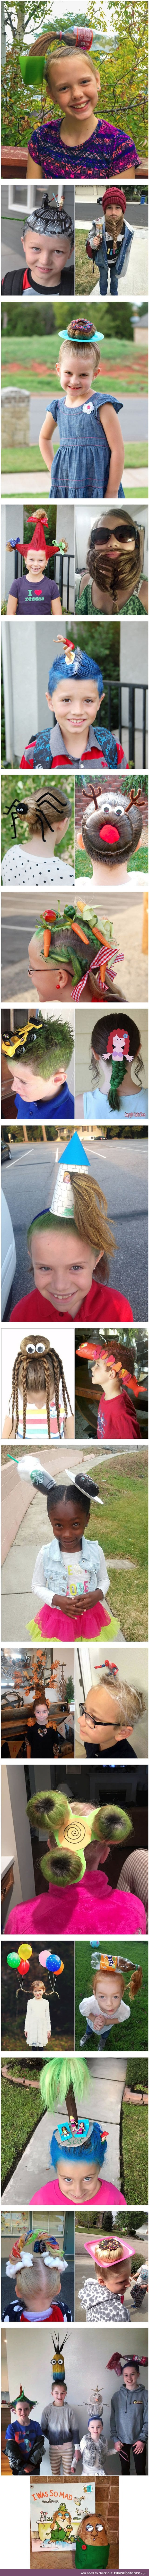 15+ kids with best hairdos from "crazy hair day" at schools